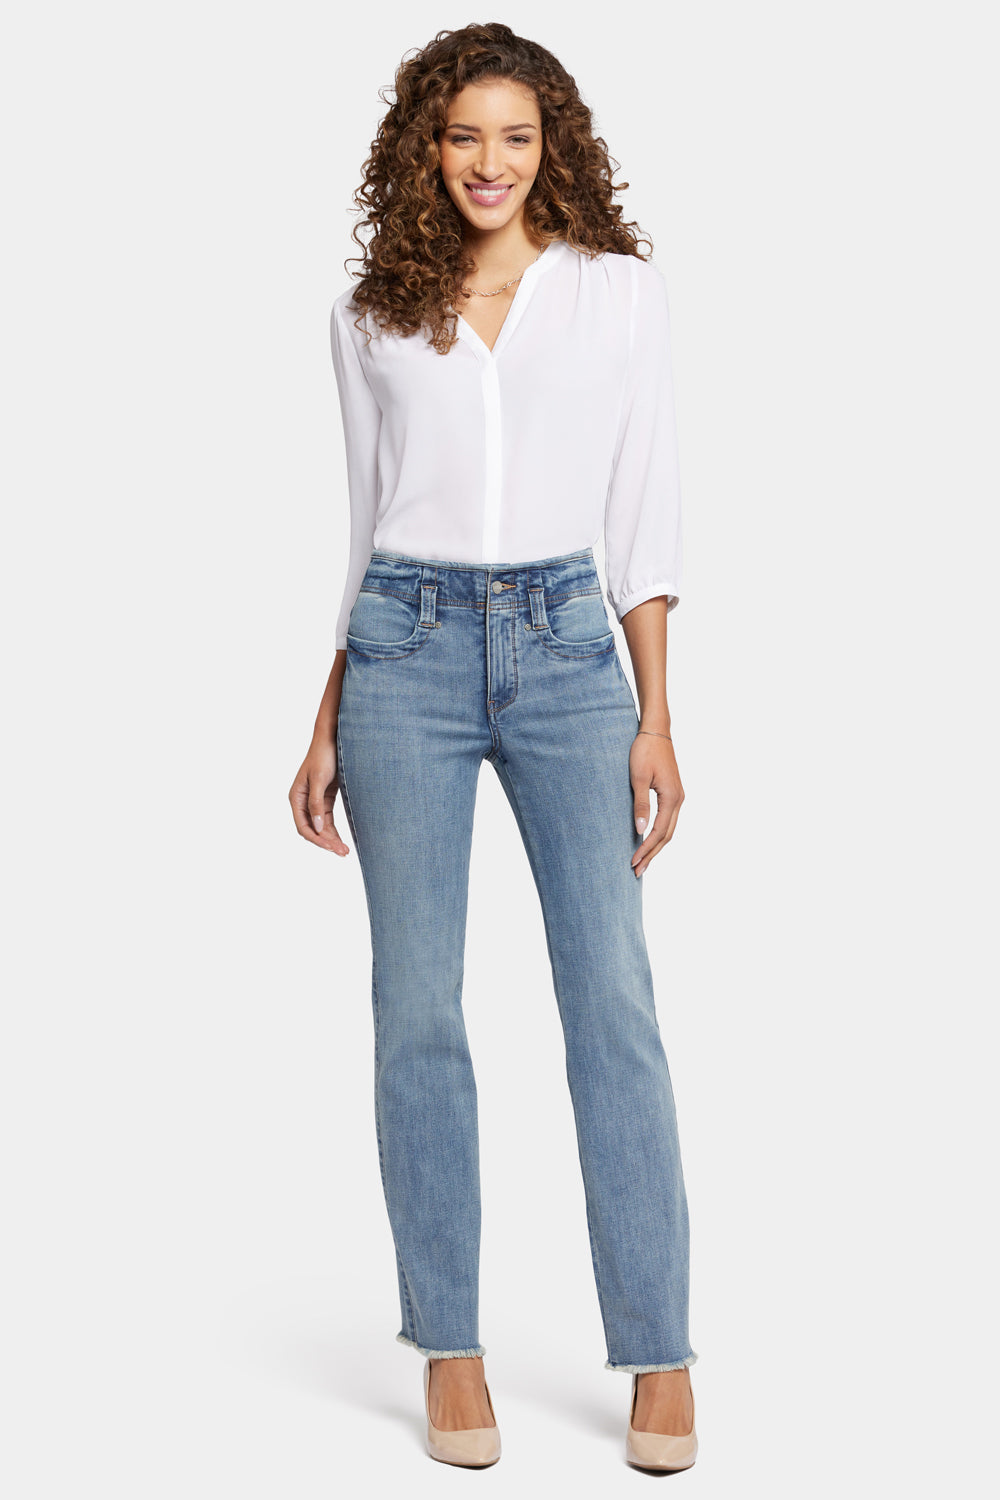 Women's Jeans On Sale - Skinny, Flared & Straight